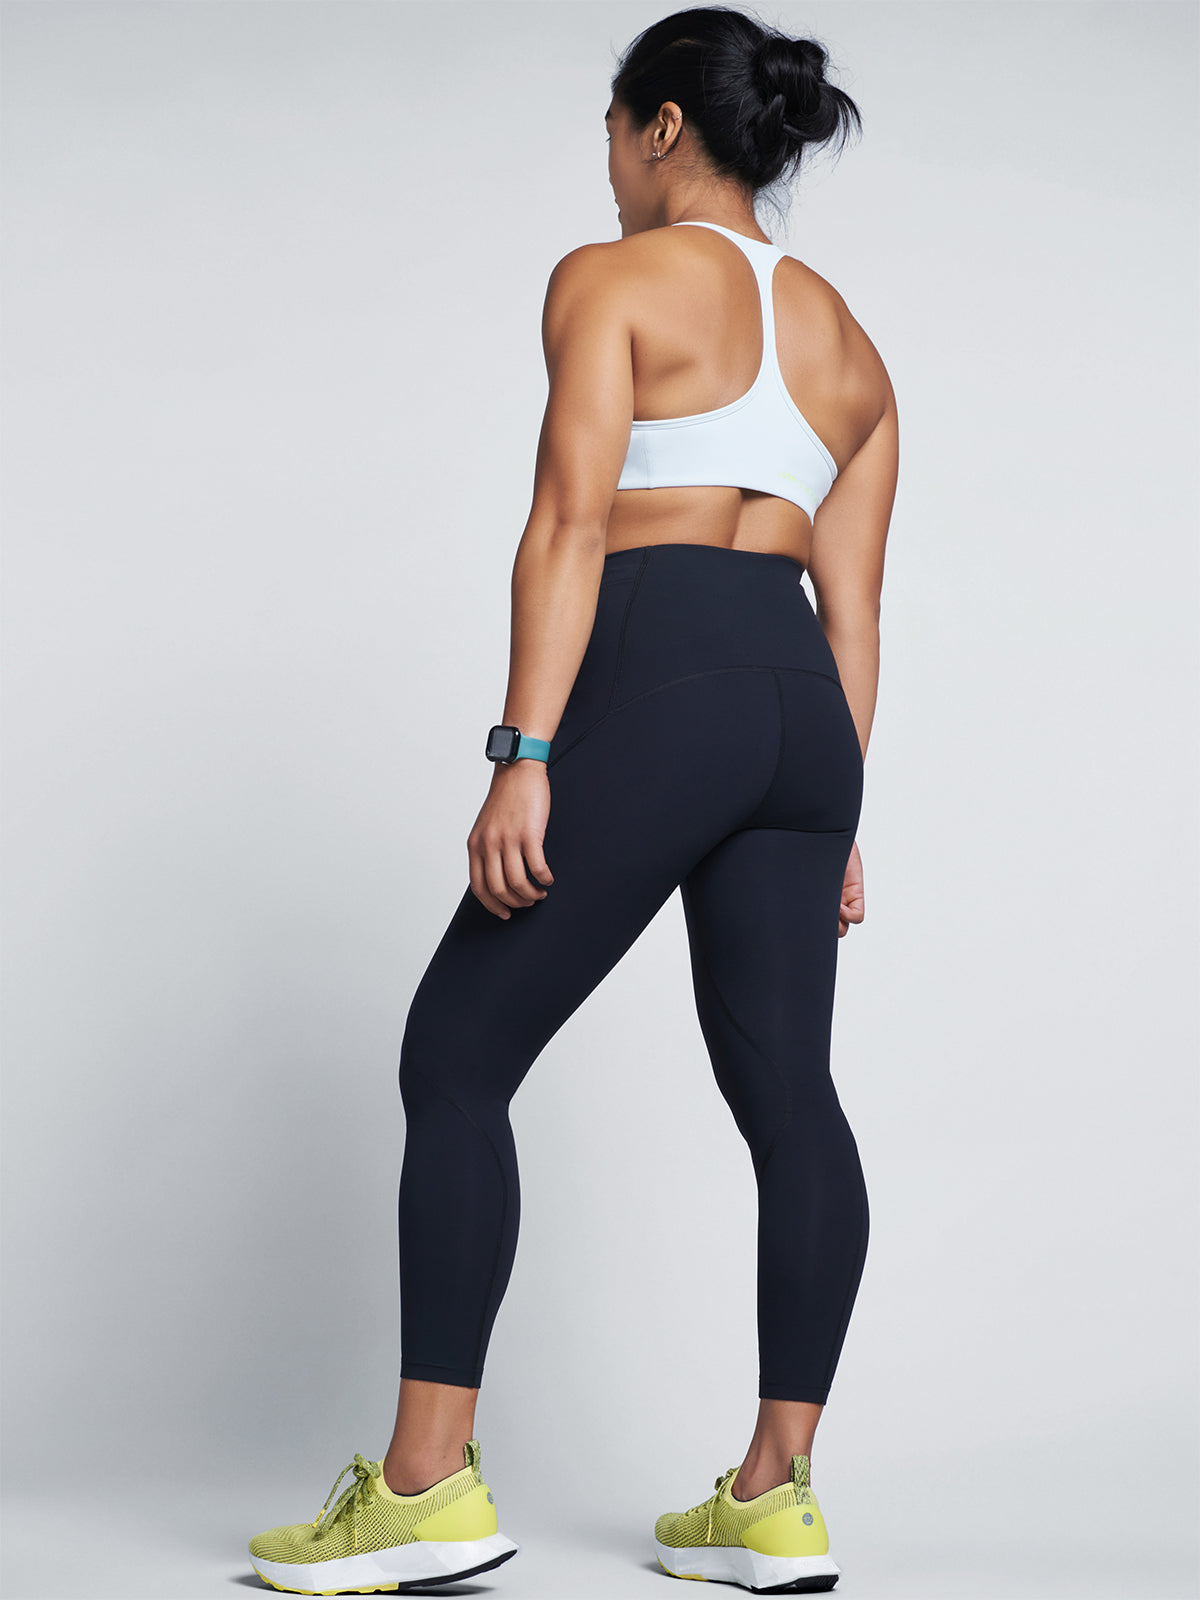 THE OUTER LIMITS SUPER HIGH RISE 7/8 Legging Black